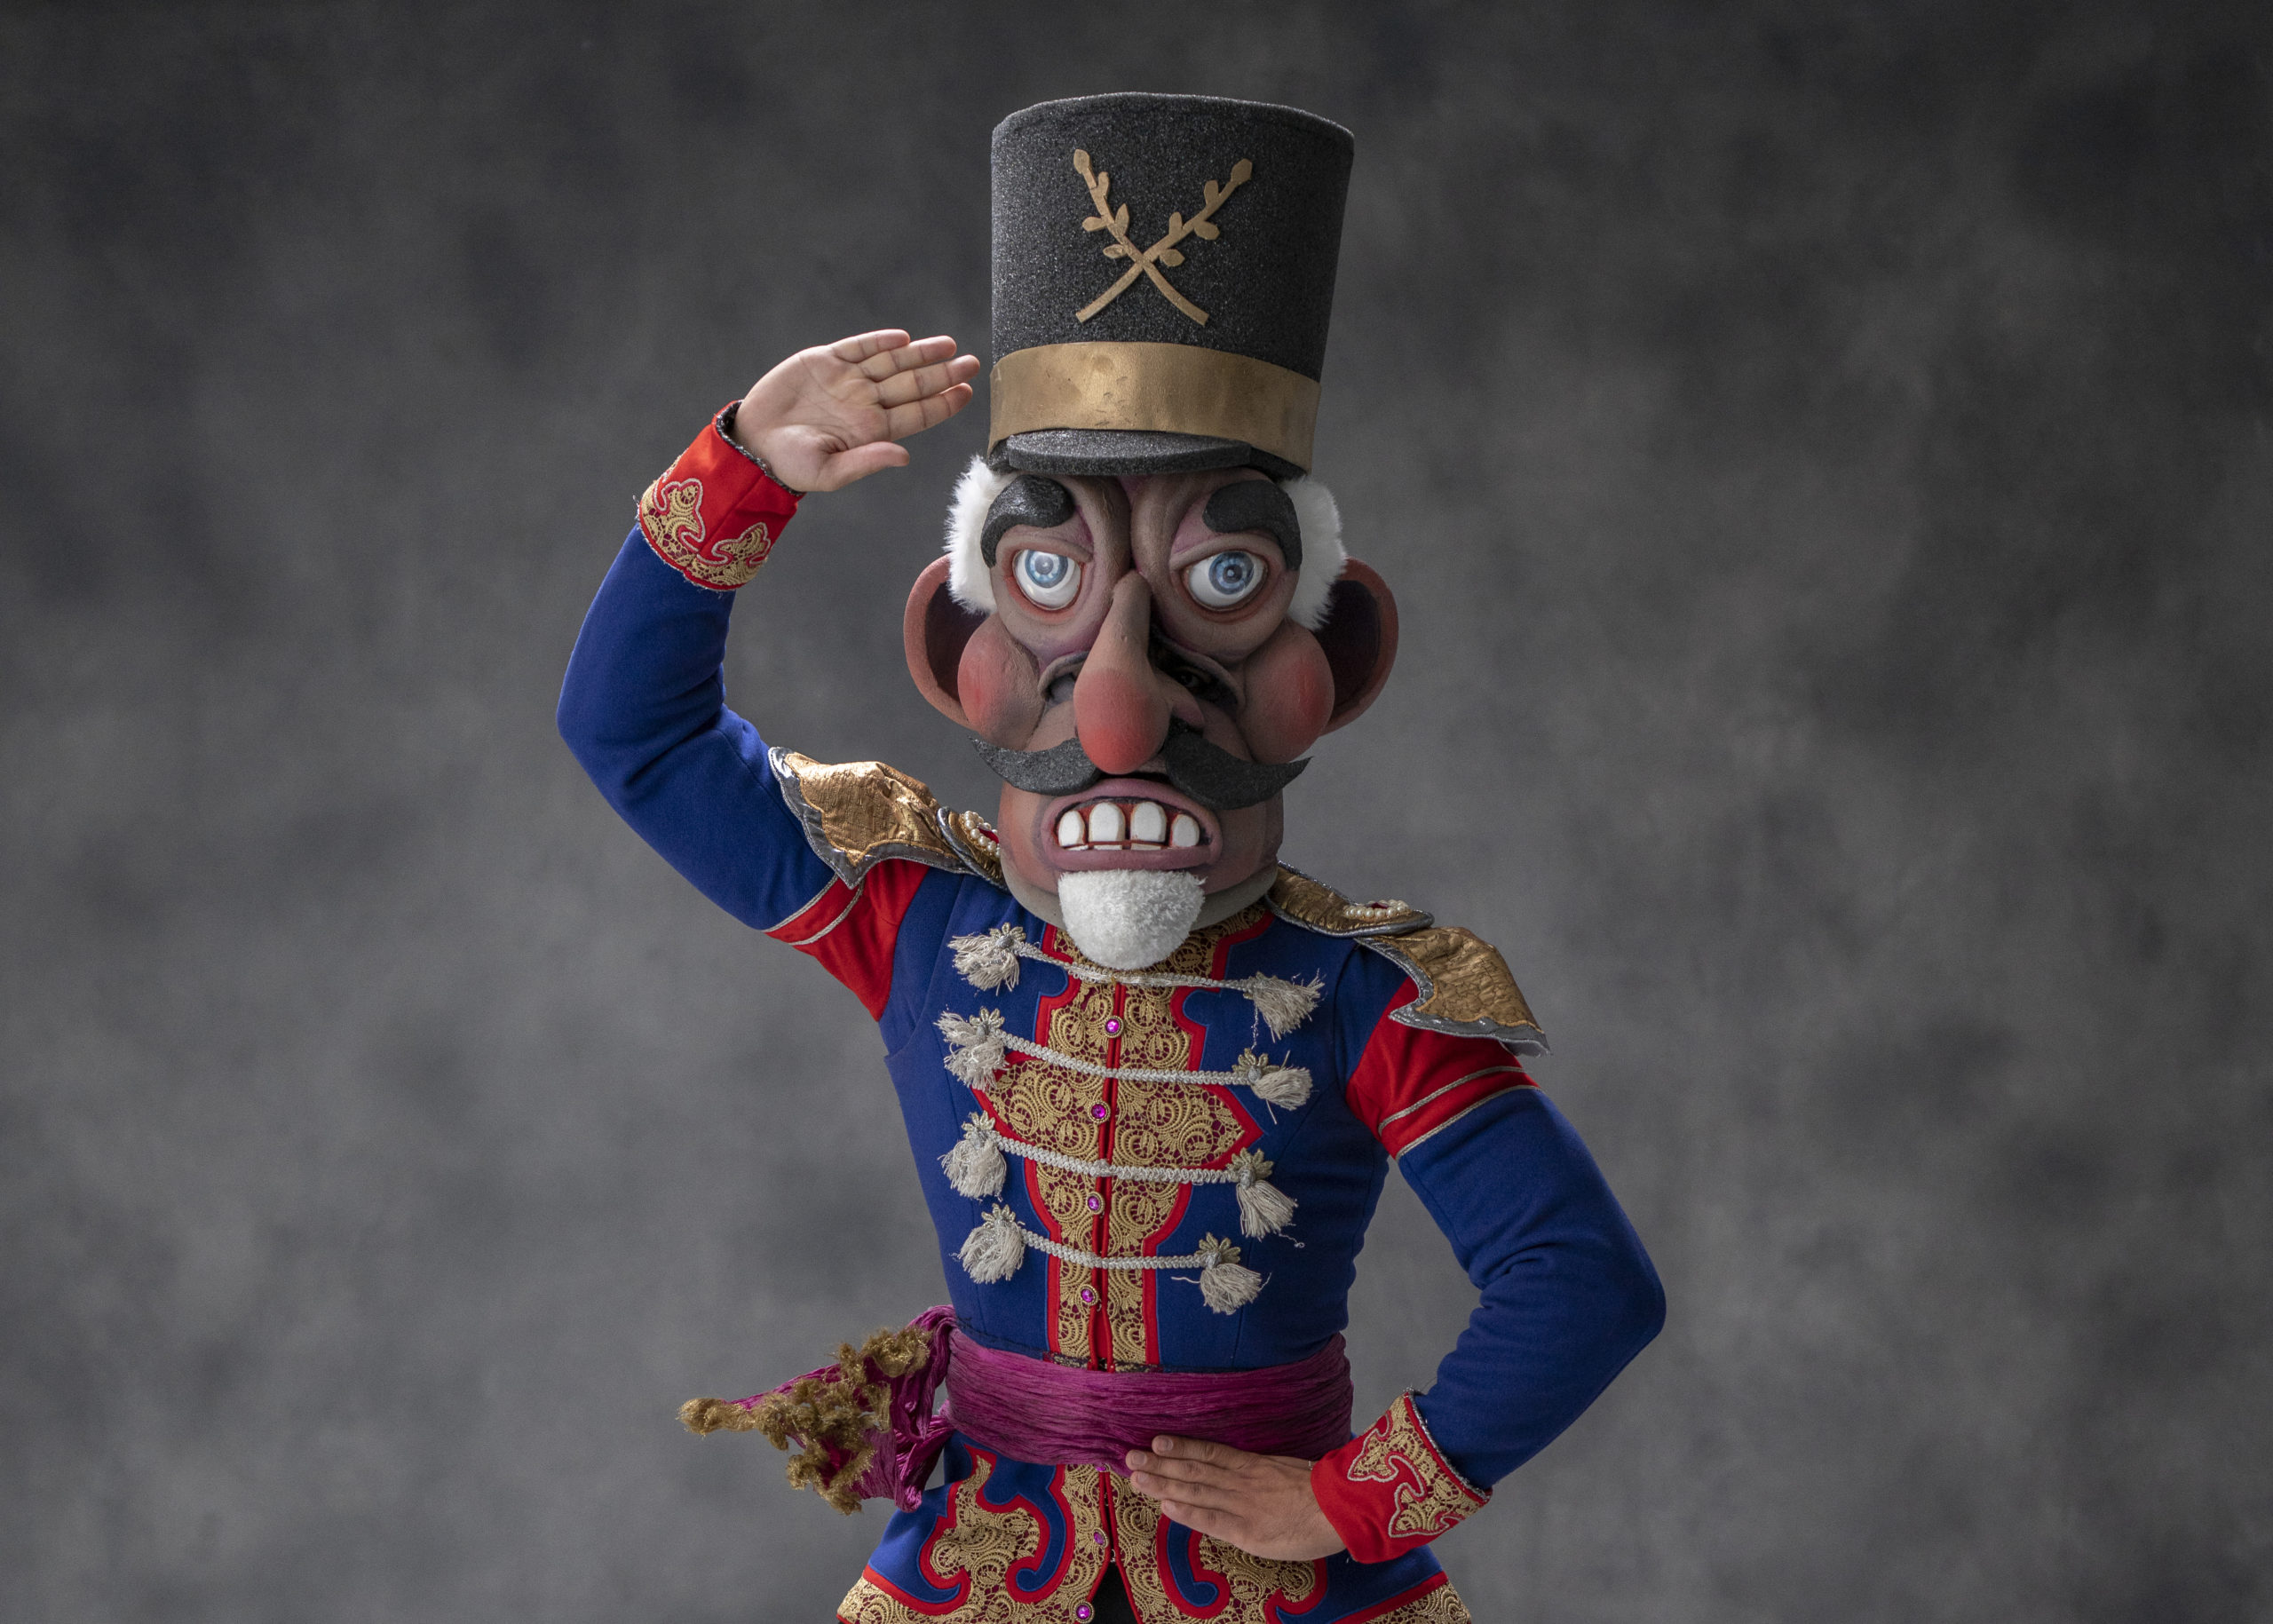 A male dancer is shown from the waist up wearing a Nutcracker costume and large Nutcracker head. He holds his left hand at his waist and salutes with his right hand.